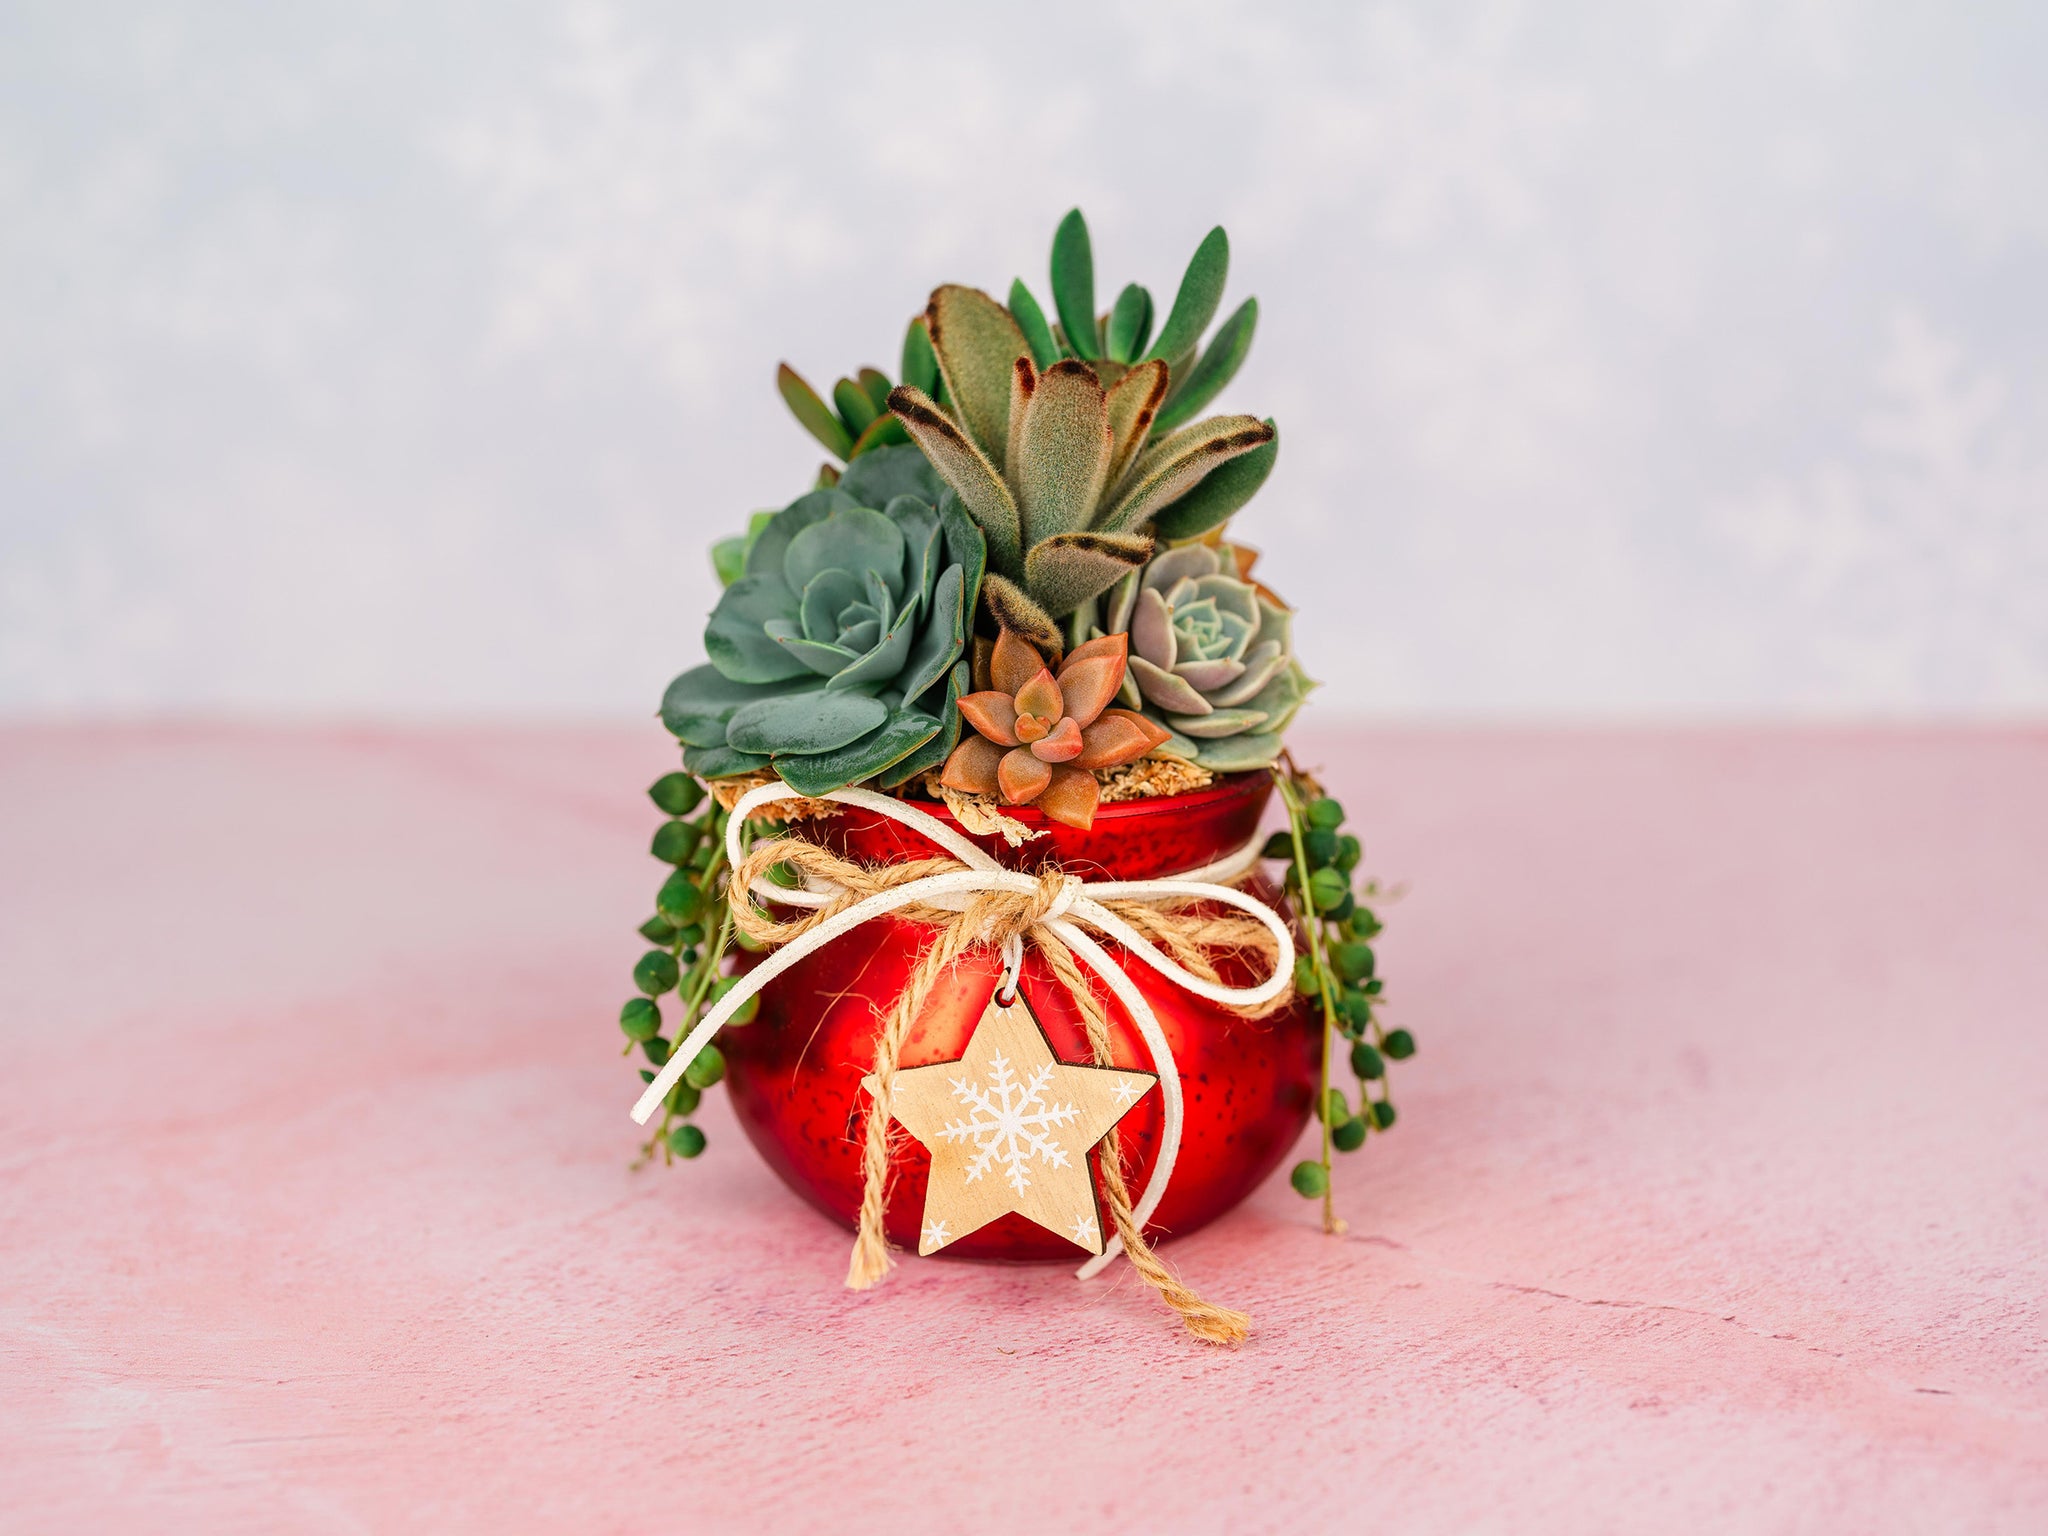 Red Mercury Glass Christmas Succulent Gift Arrangement with Rustic Wood Star